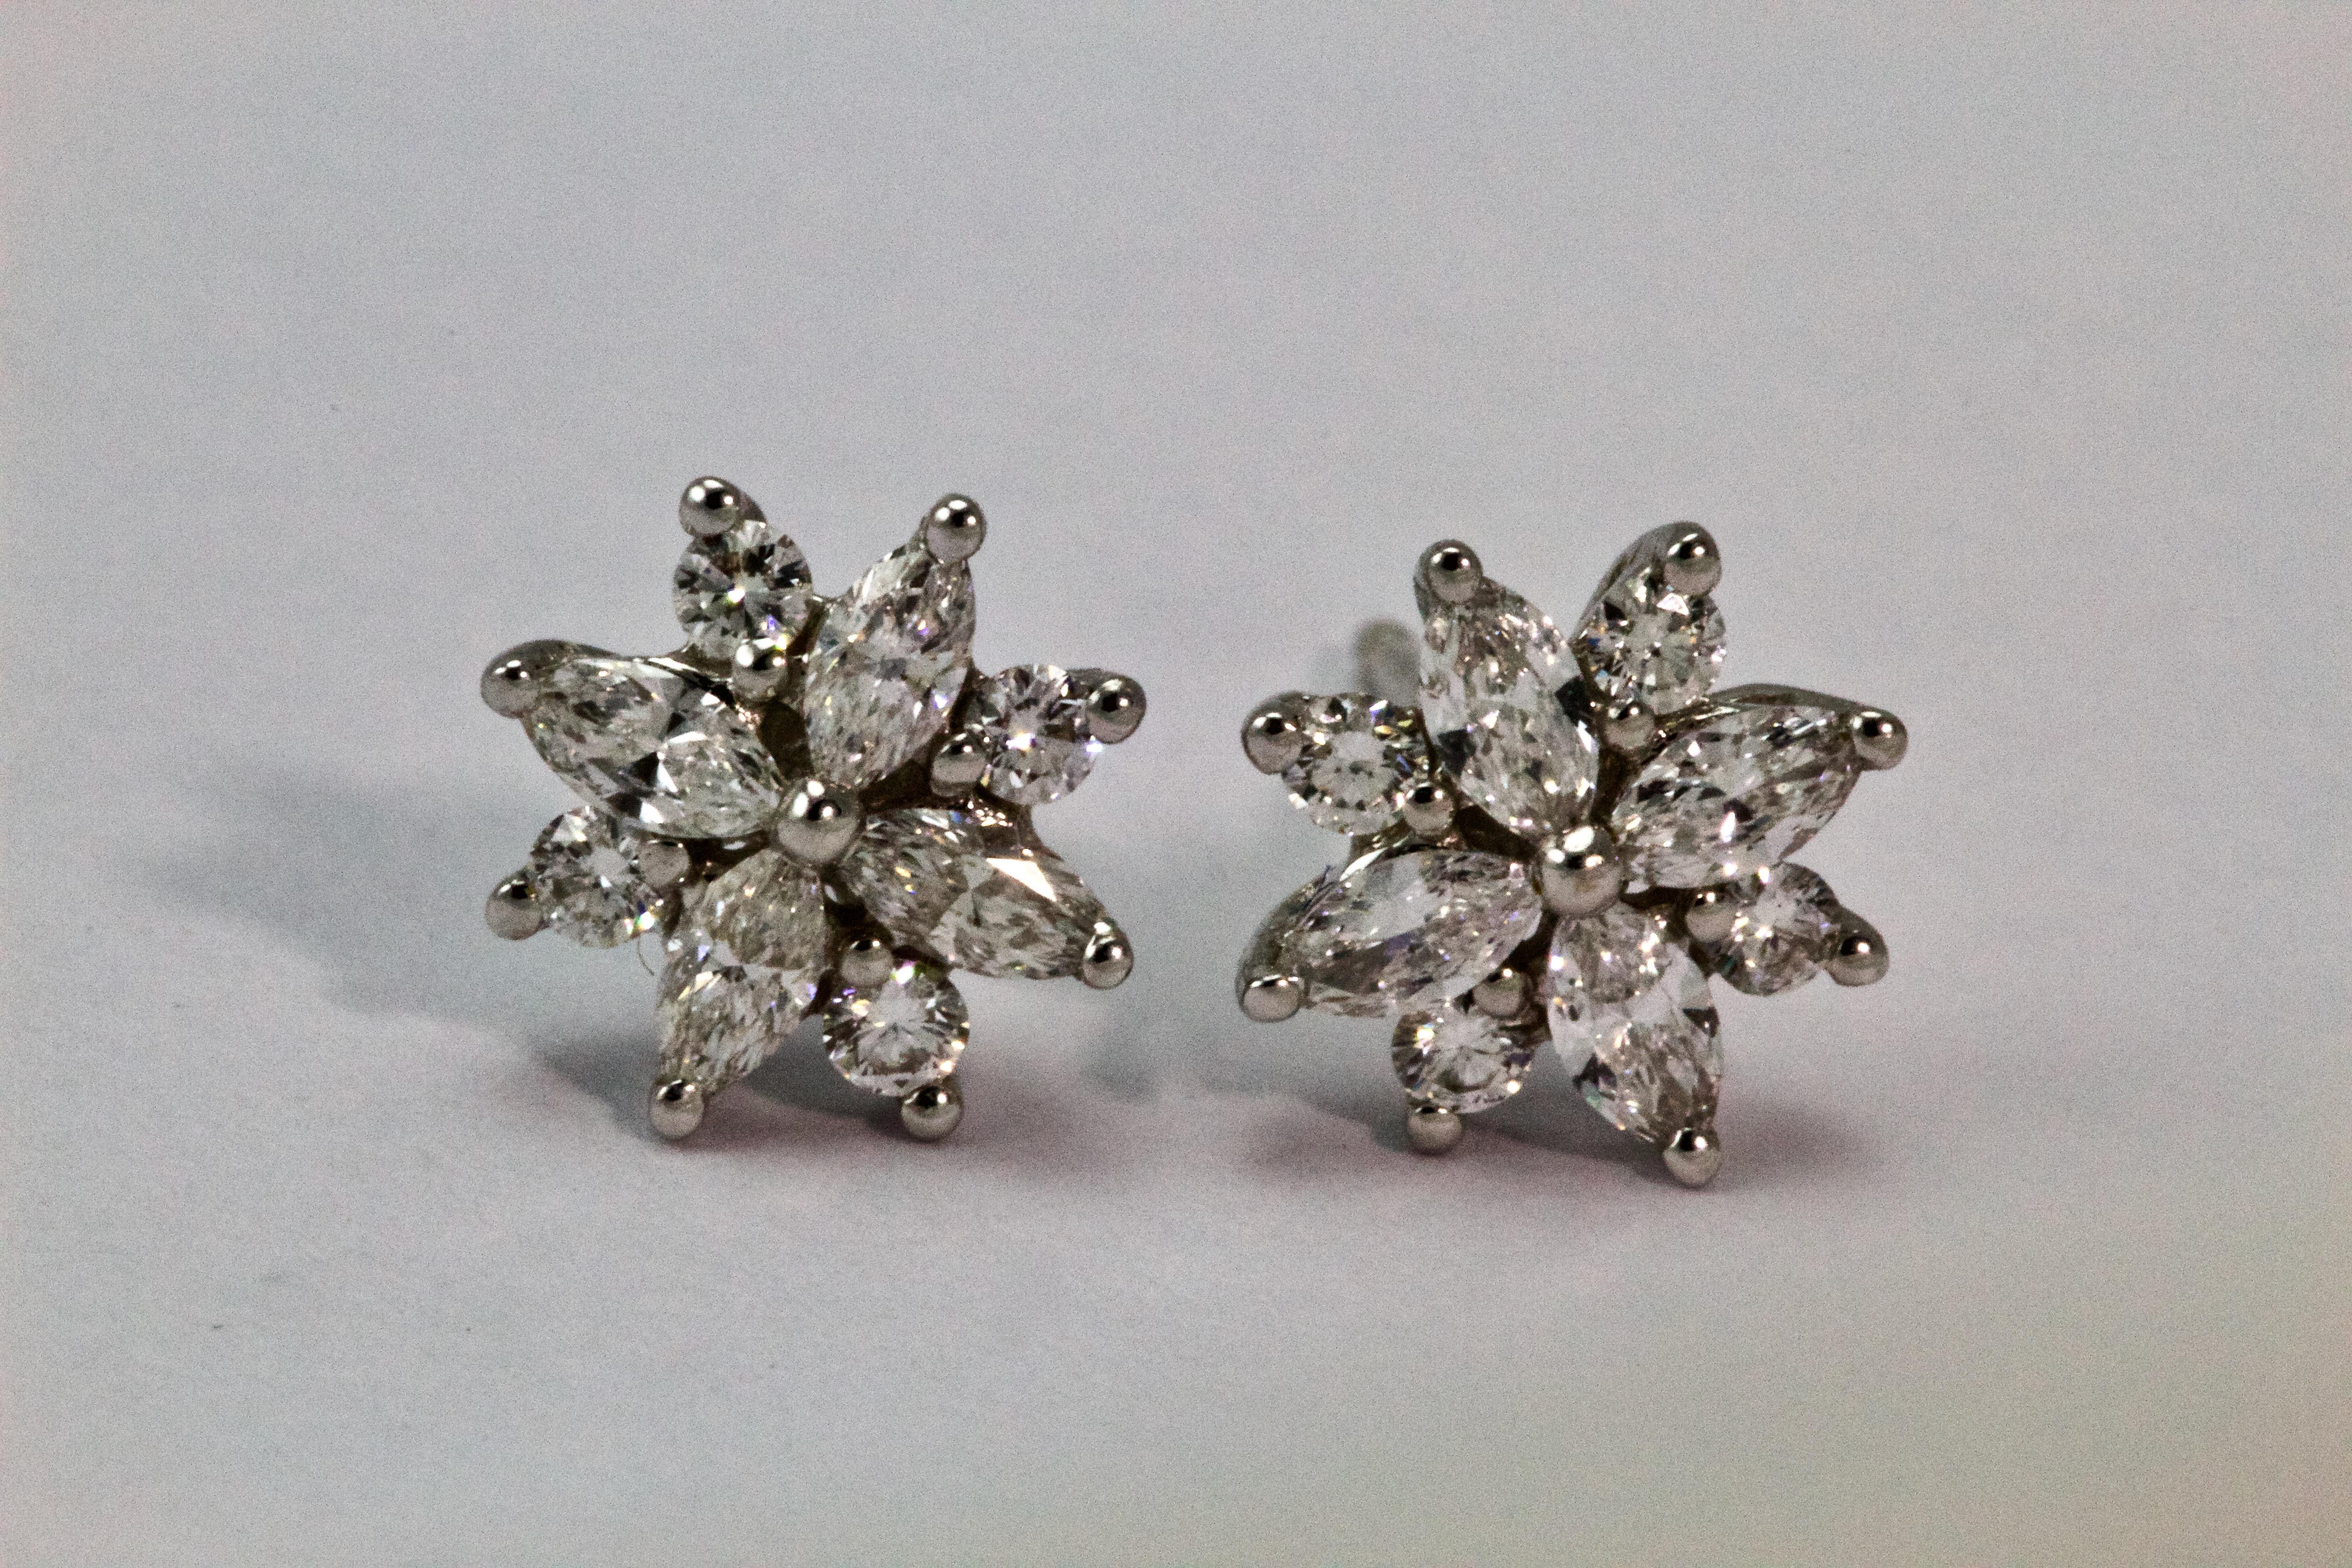 Adorable 18 carat white gold studs, wonderfully modelled as delicate flowers, with marquise shaped diamonds, accented by round brilliant cut diamonds. 

Measurements: approx 8.65mm

Weight: 2.4 grams total